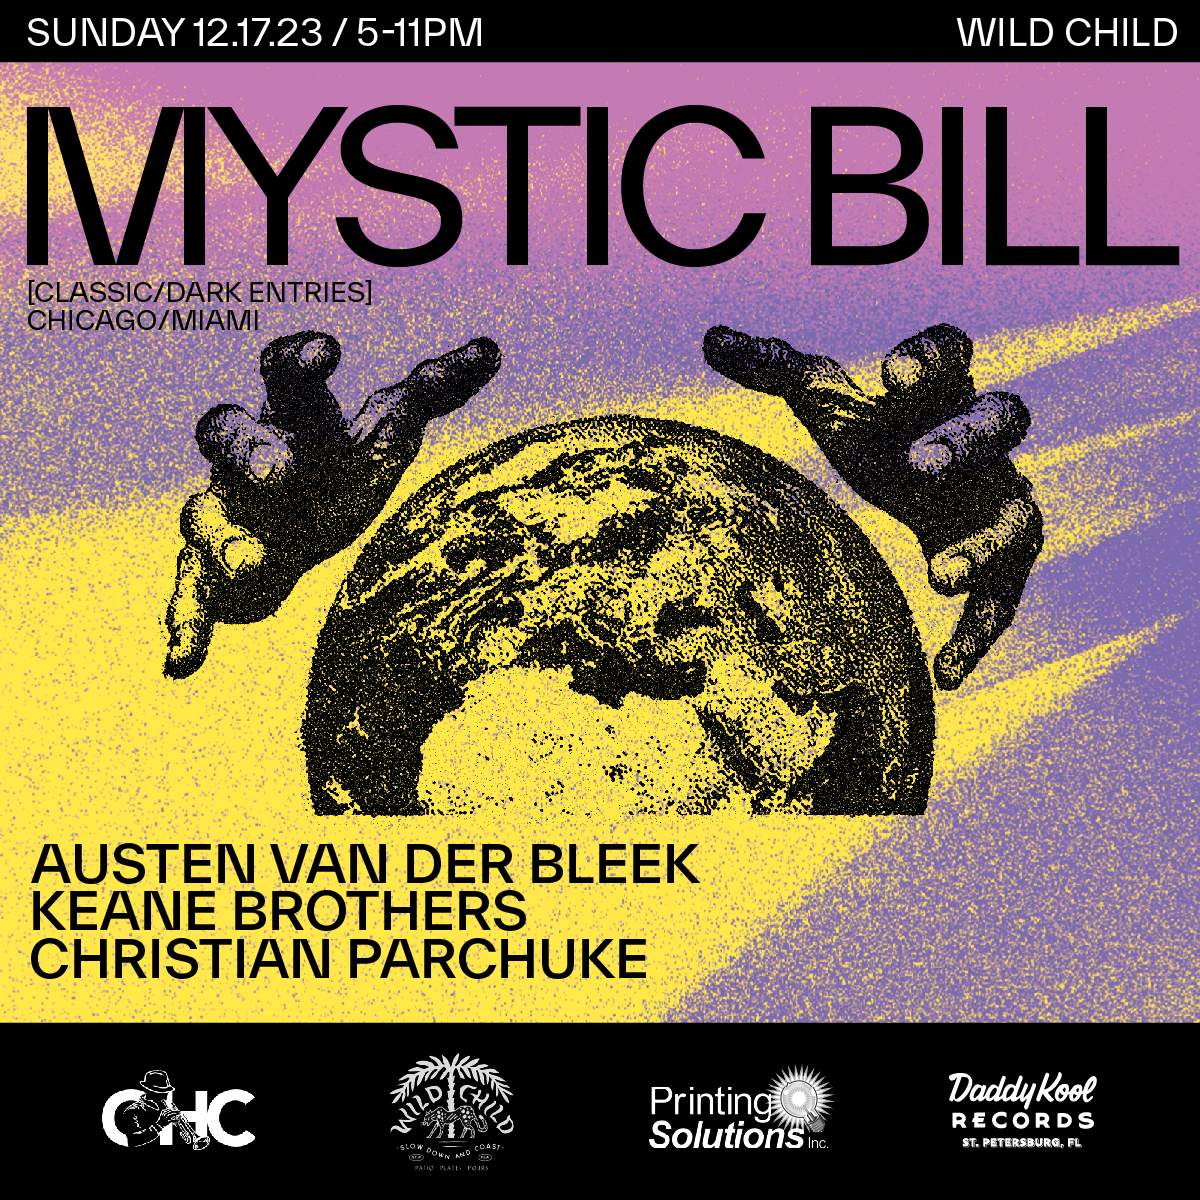 Sunday Open Air with Mystic Bill (Chicago/Miami) - フライヤー裏